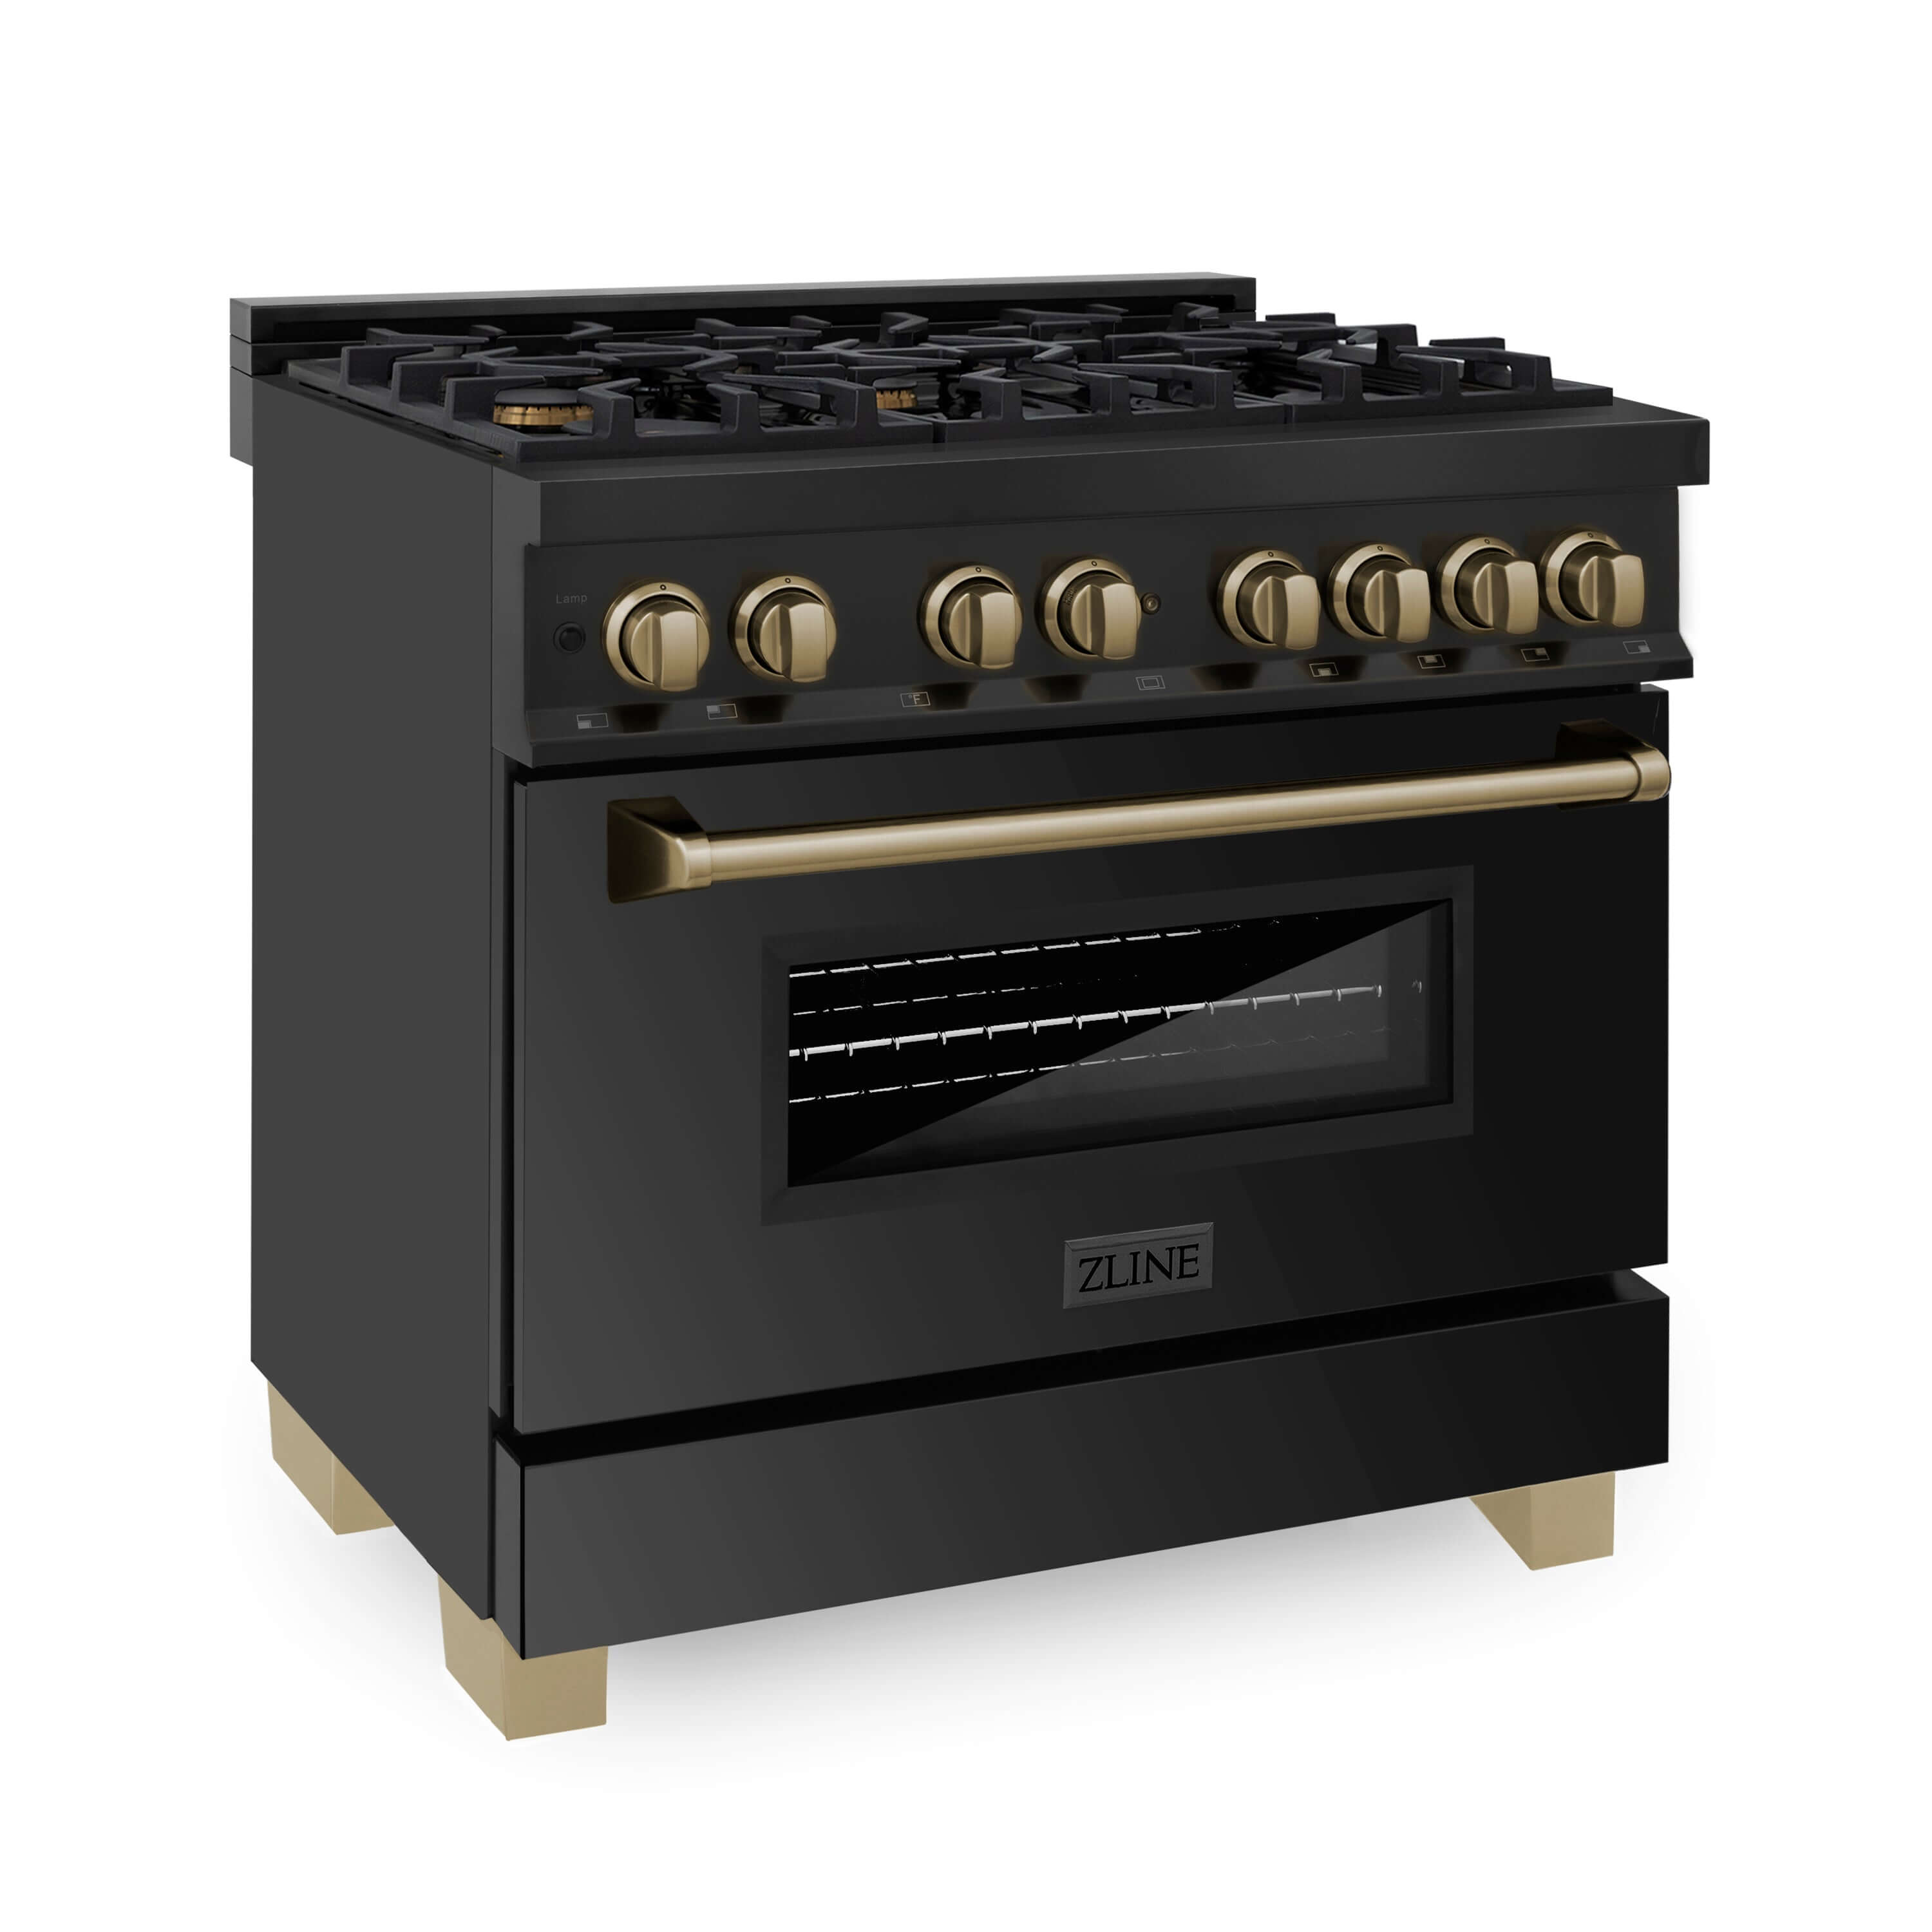 ZLINE Autograph Edition 36" Black Stainless Steel Dual Fuel Range with Polished Gold accents (RABZ-36-G) side, oven door closed.